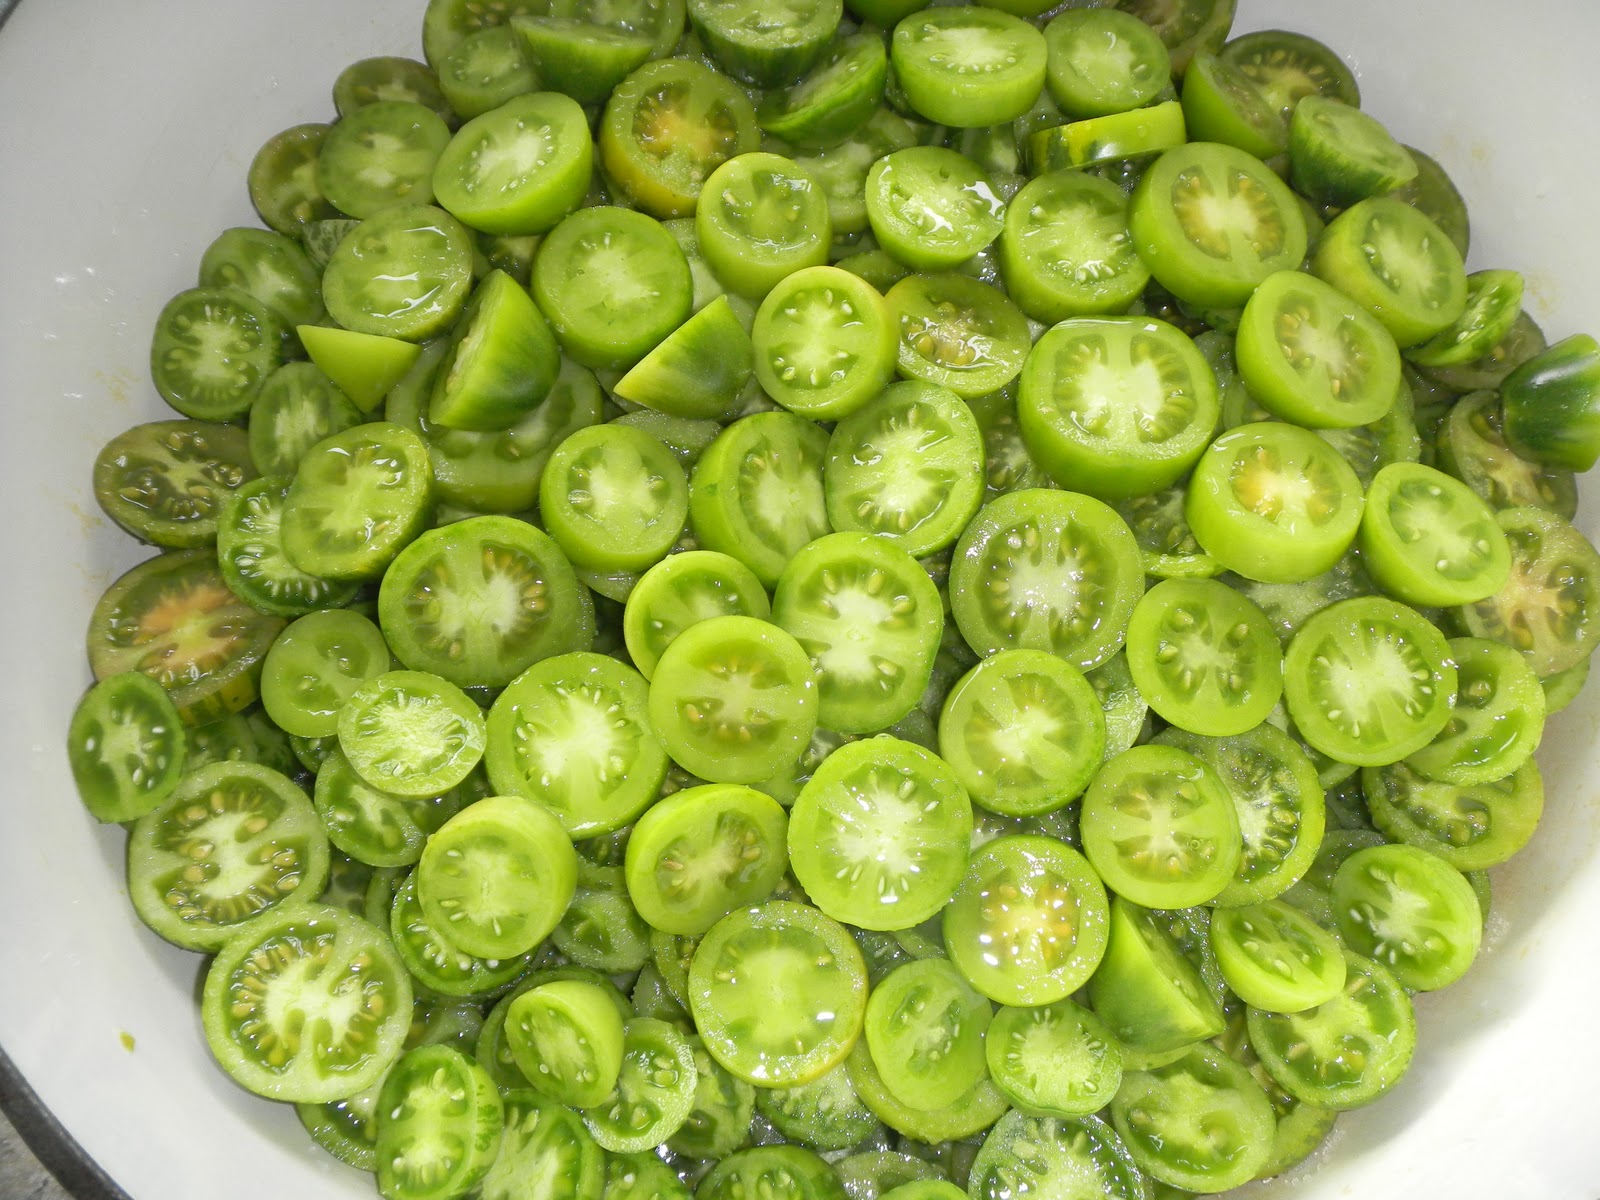 Adventures in Urban Farming: Canning Green Tomato Pickles